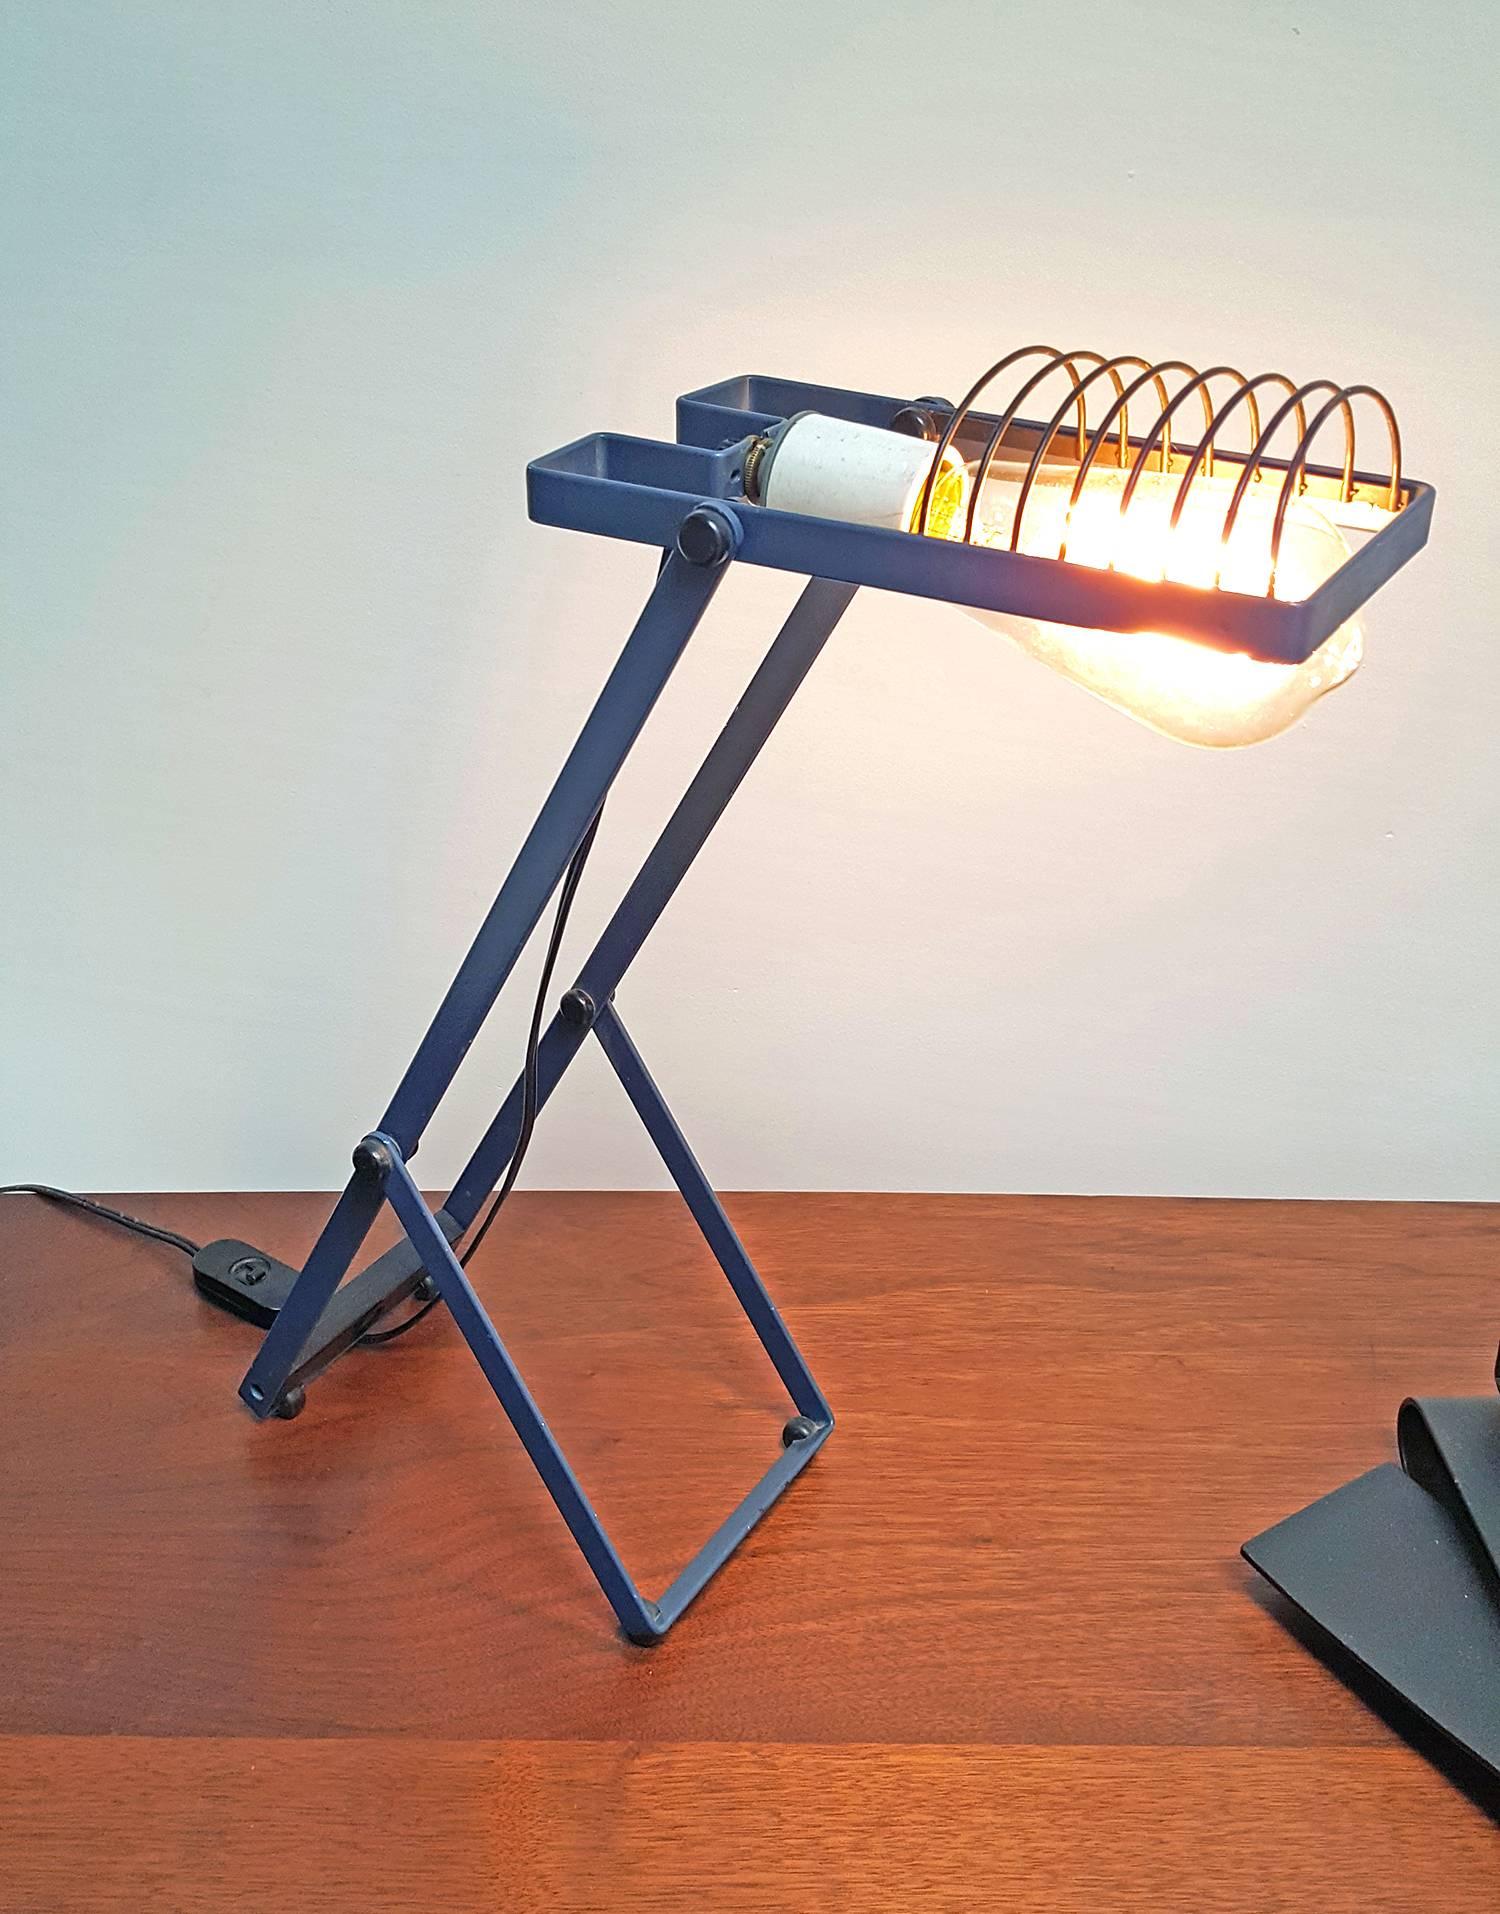 Architectural Sintesi desk lamp in unusual original blue finish designed by Ernesto Gismondi for Artemide. Gismondi was the founder of the Italian company Artemide. The lamp adjusts to a myriad of different positions. It is on permanent display at